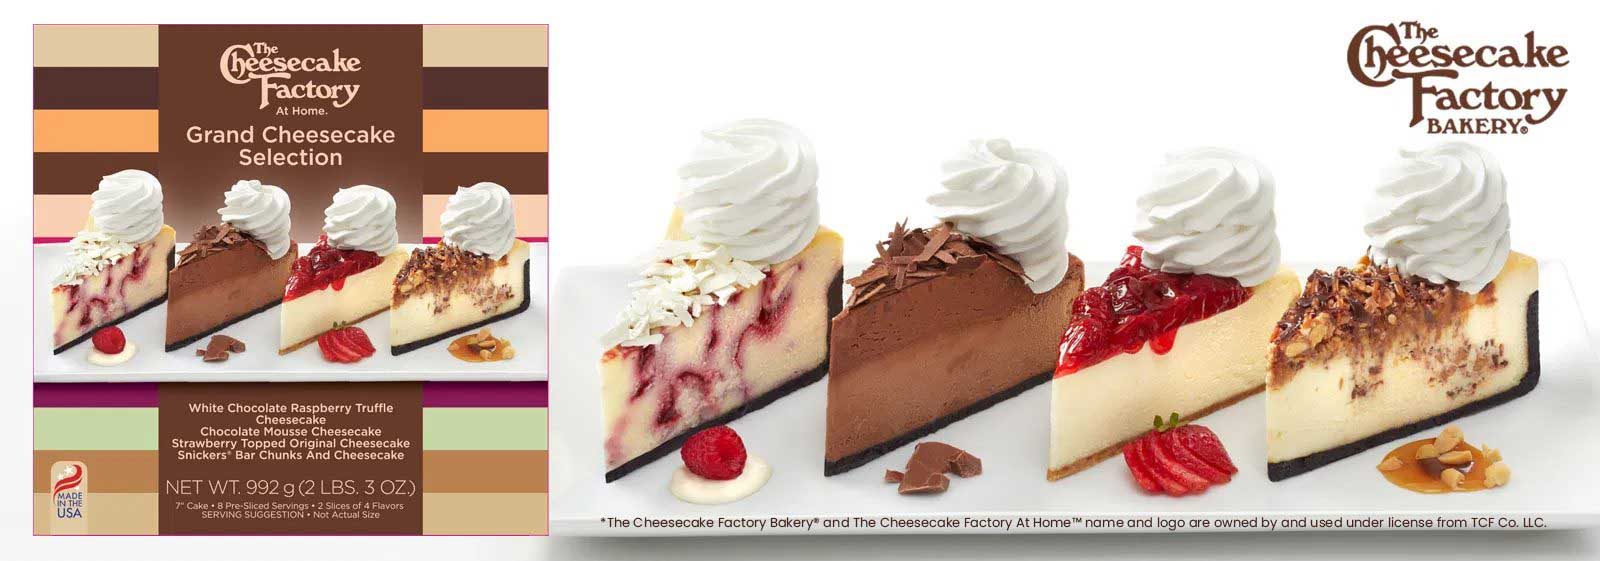 The Cheesecake Factory Grand Cheesecake Selection for retailers in UK & Europe